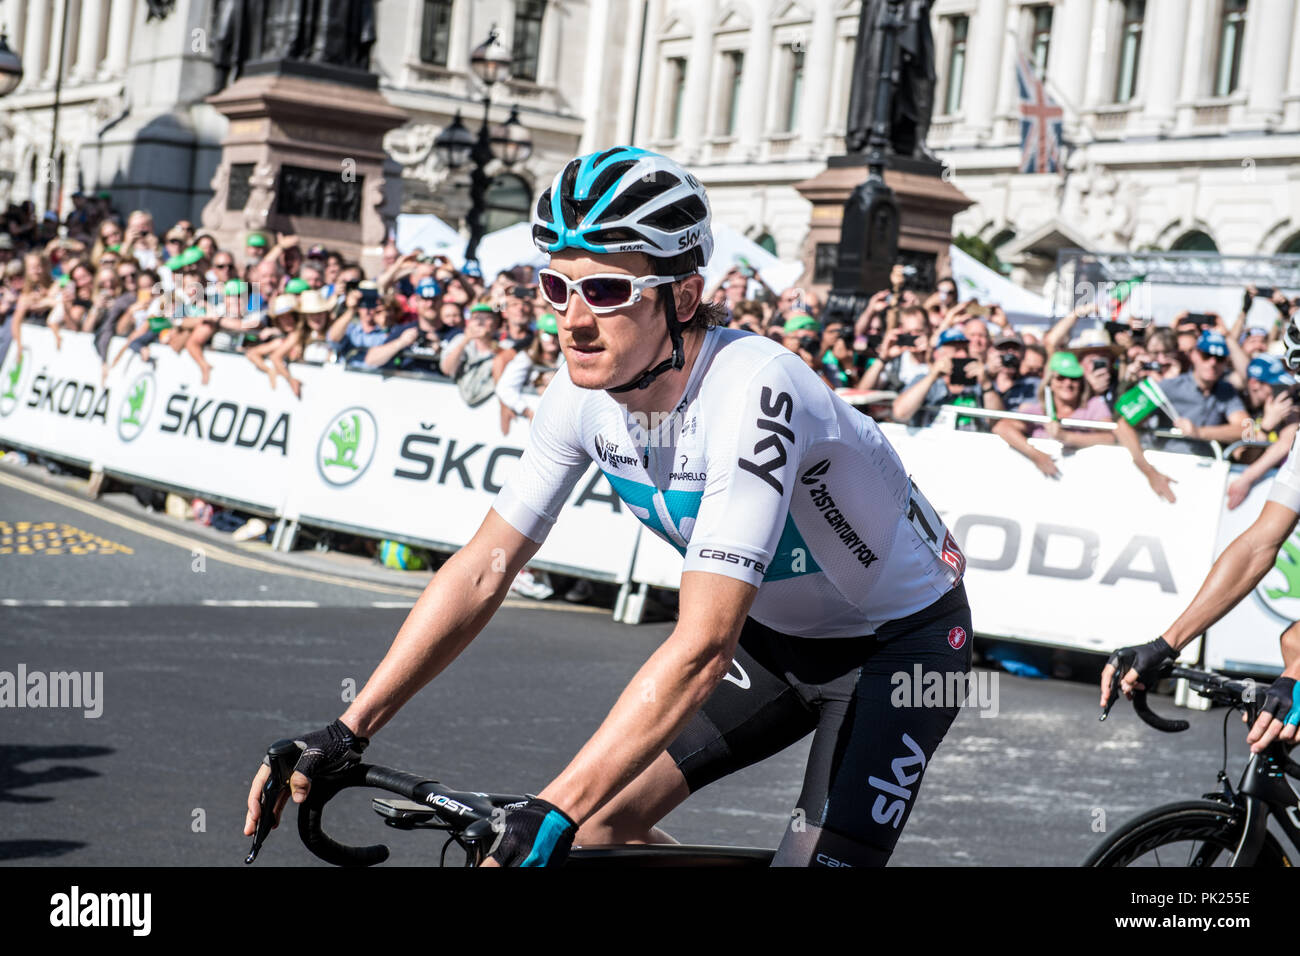 Ovo Tour of Britain, stage 8,London England UK. 9th September 2018 Stock Photo